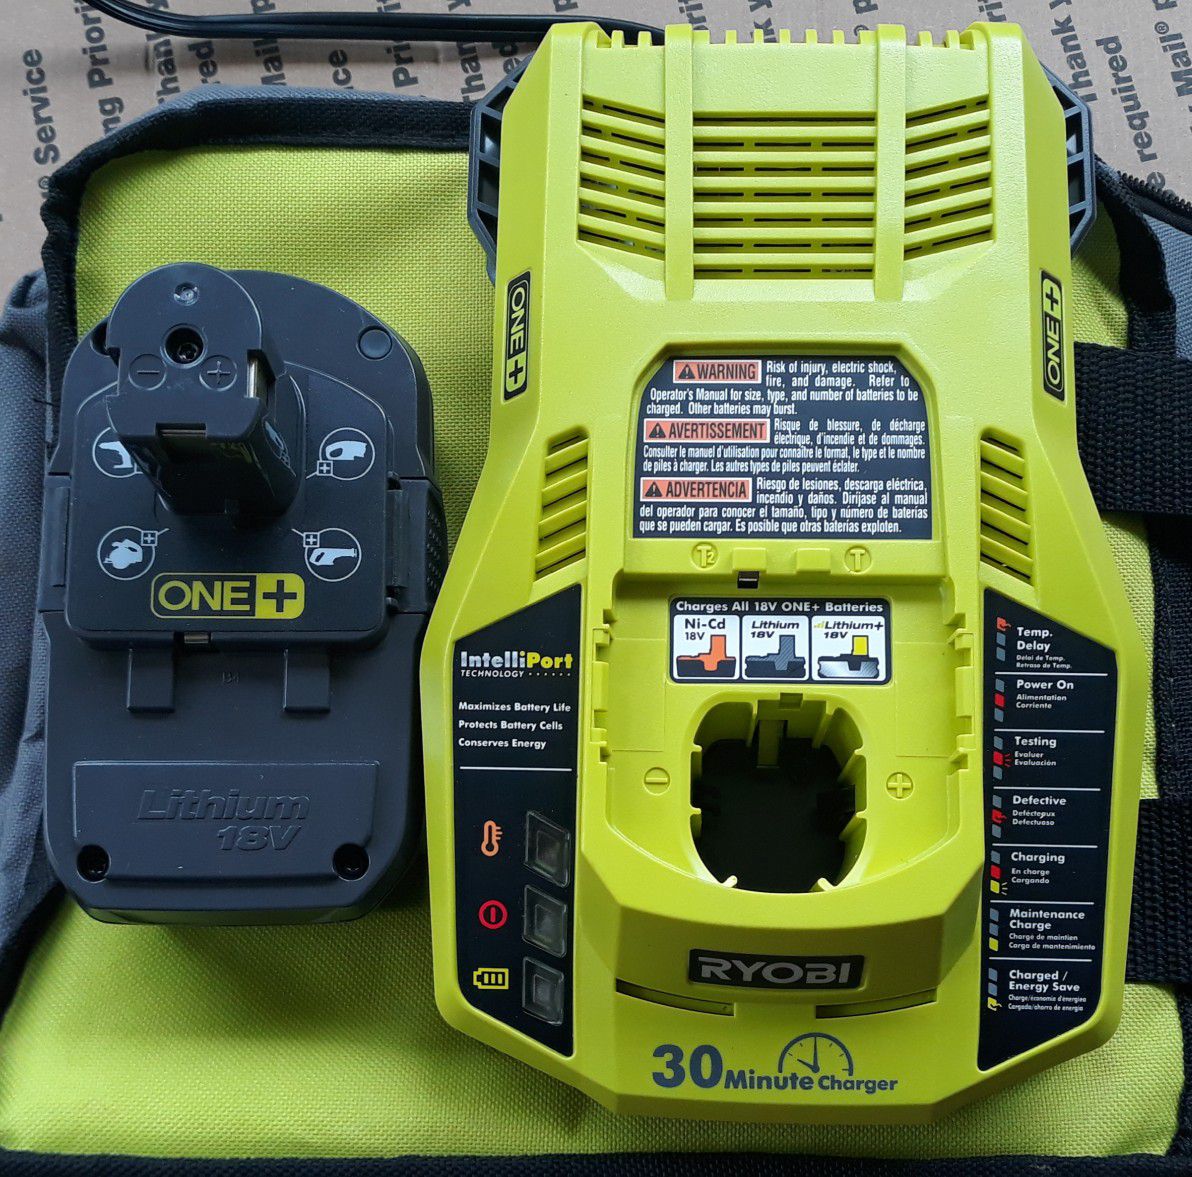 Ryobi 18 volt 3 amp battery and charger